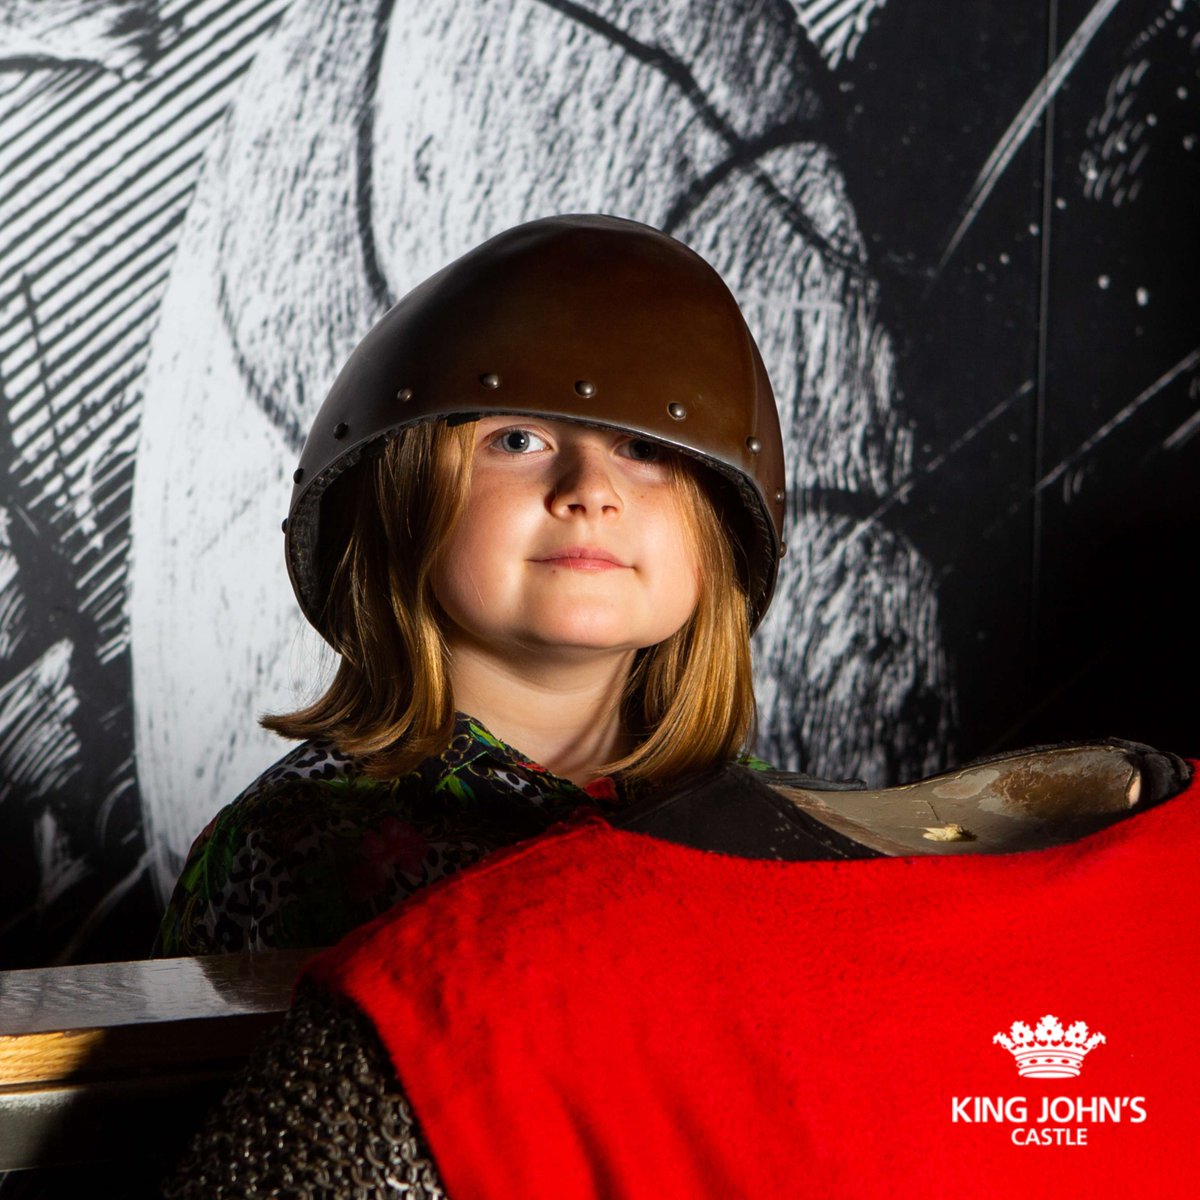 Looking for something to do with the family this weekend?🏰 Discover King John's Castle, where the whole family can enjoy a journey through medieval history! From medieval games to unraveling the secrets hidden within our ancient walls, there's something for everyone to enjoy.